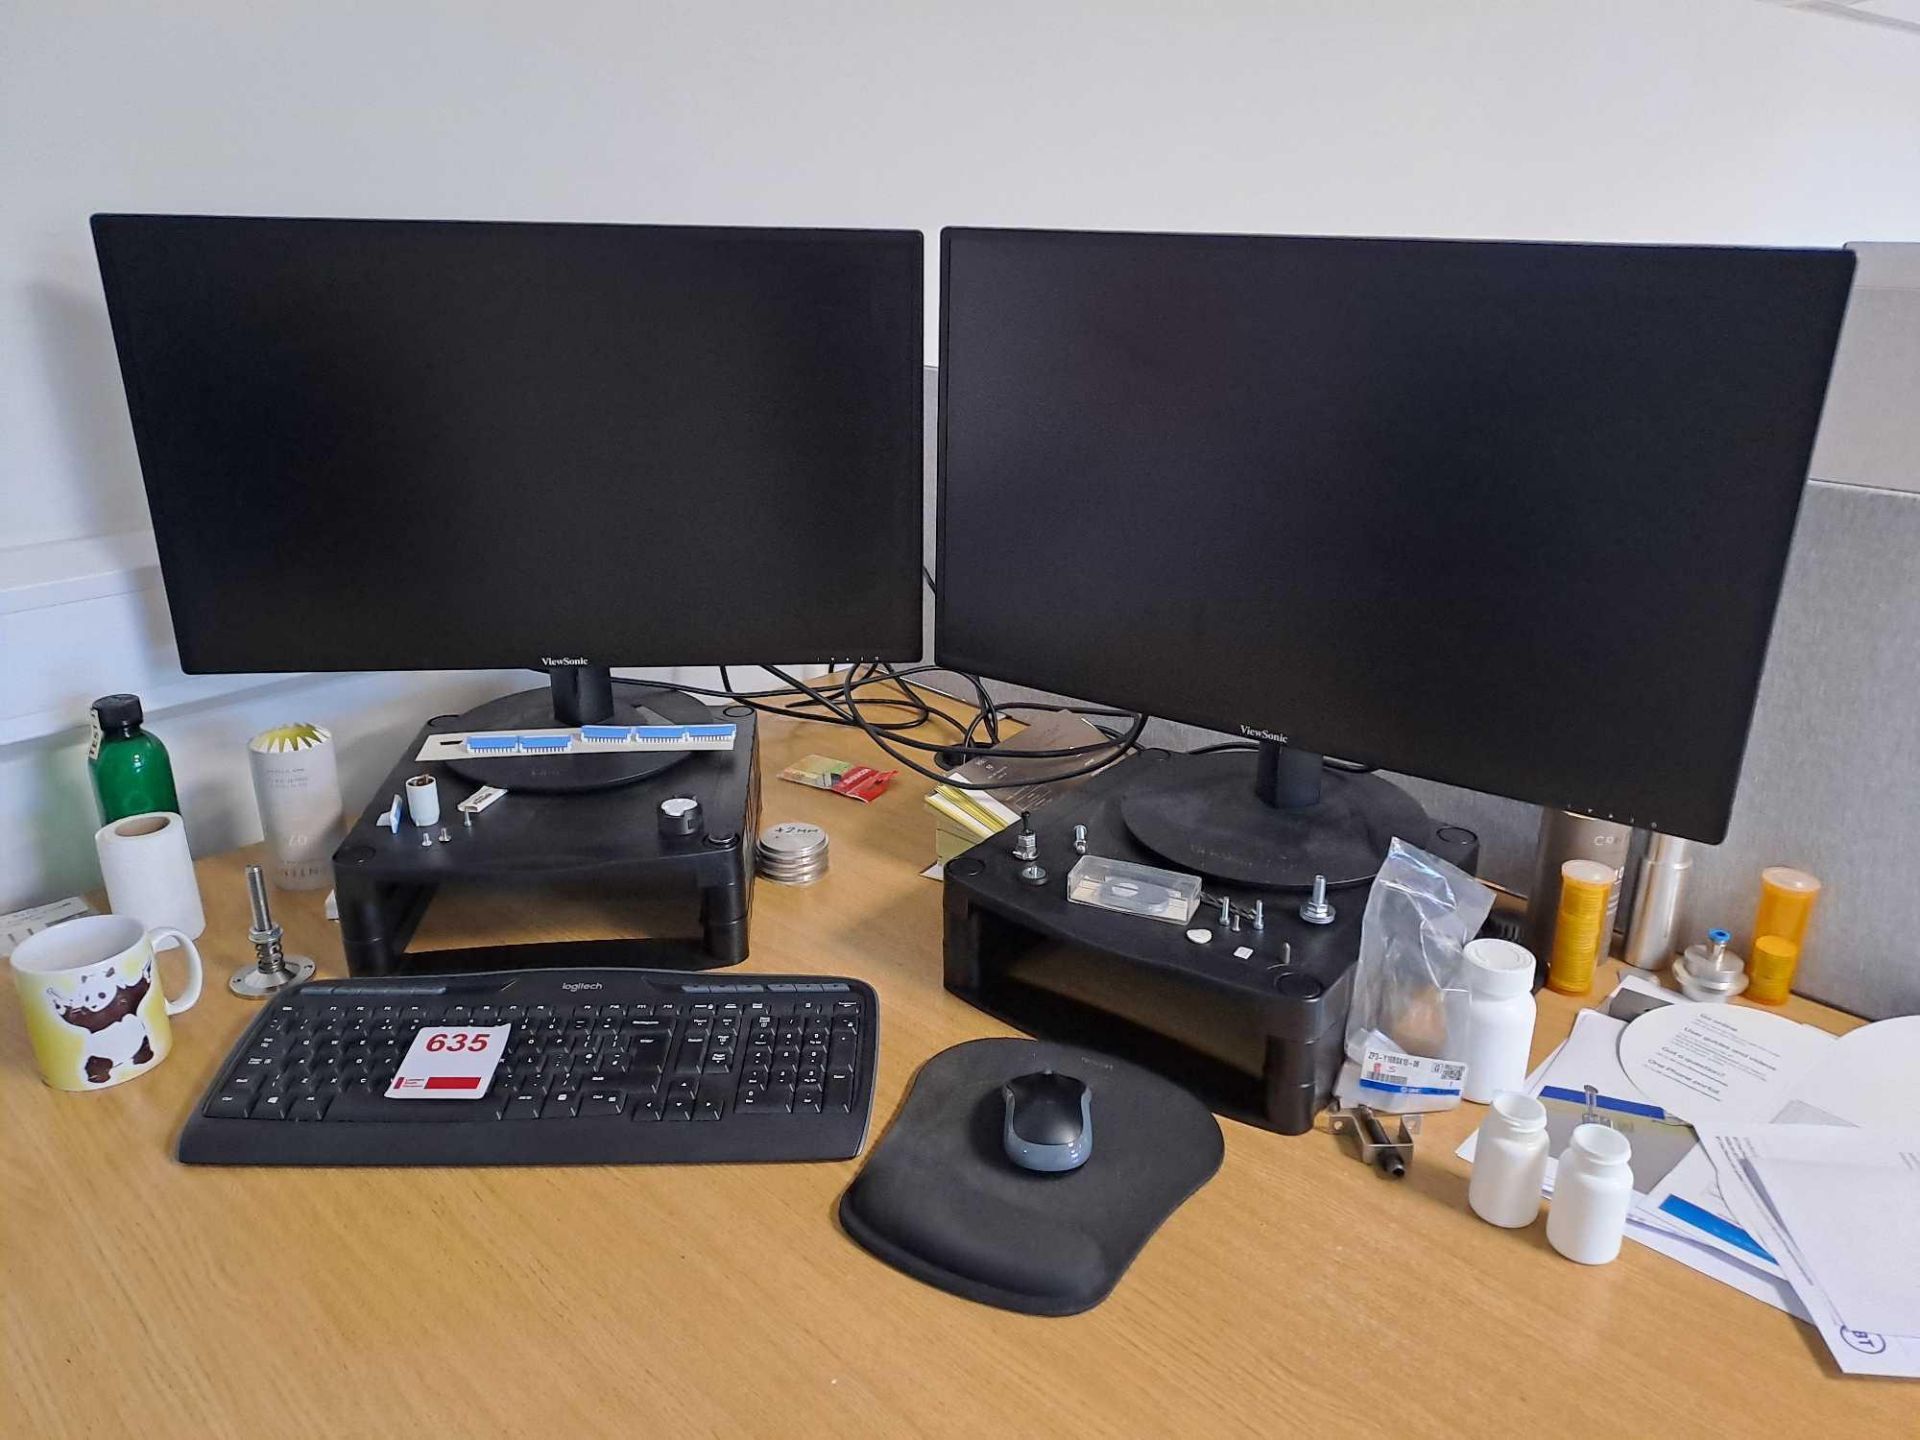 Two Viewsonic monitors, keyboard, mouse and two monitor stands